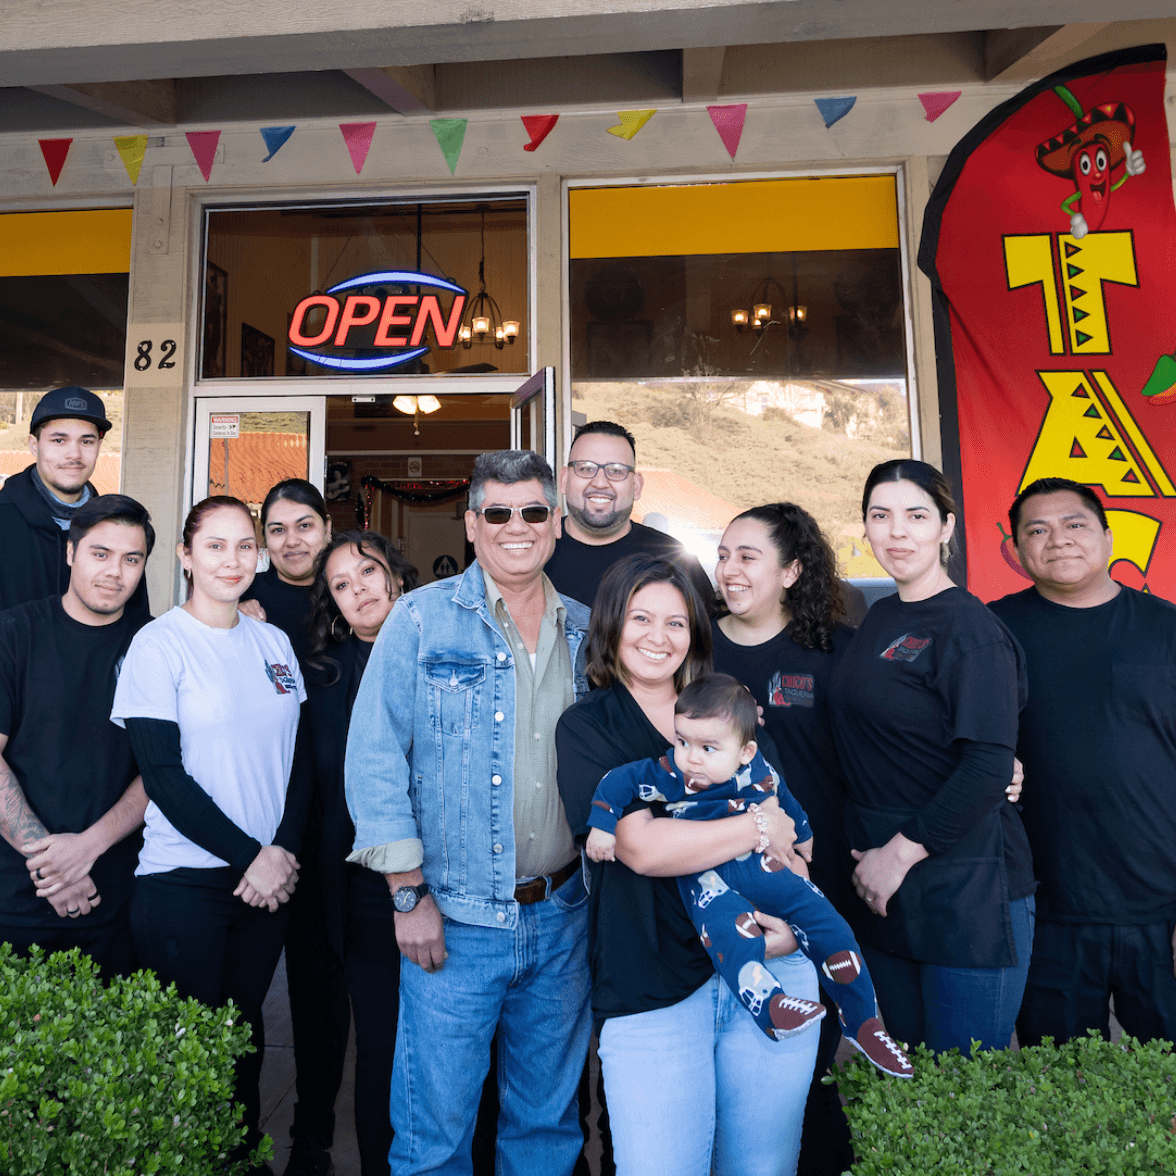 Meet some of the wonderful members of the Chico's Taqueria family who help ensure every experience is exceptional.